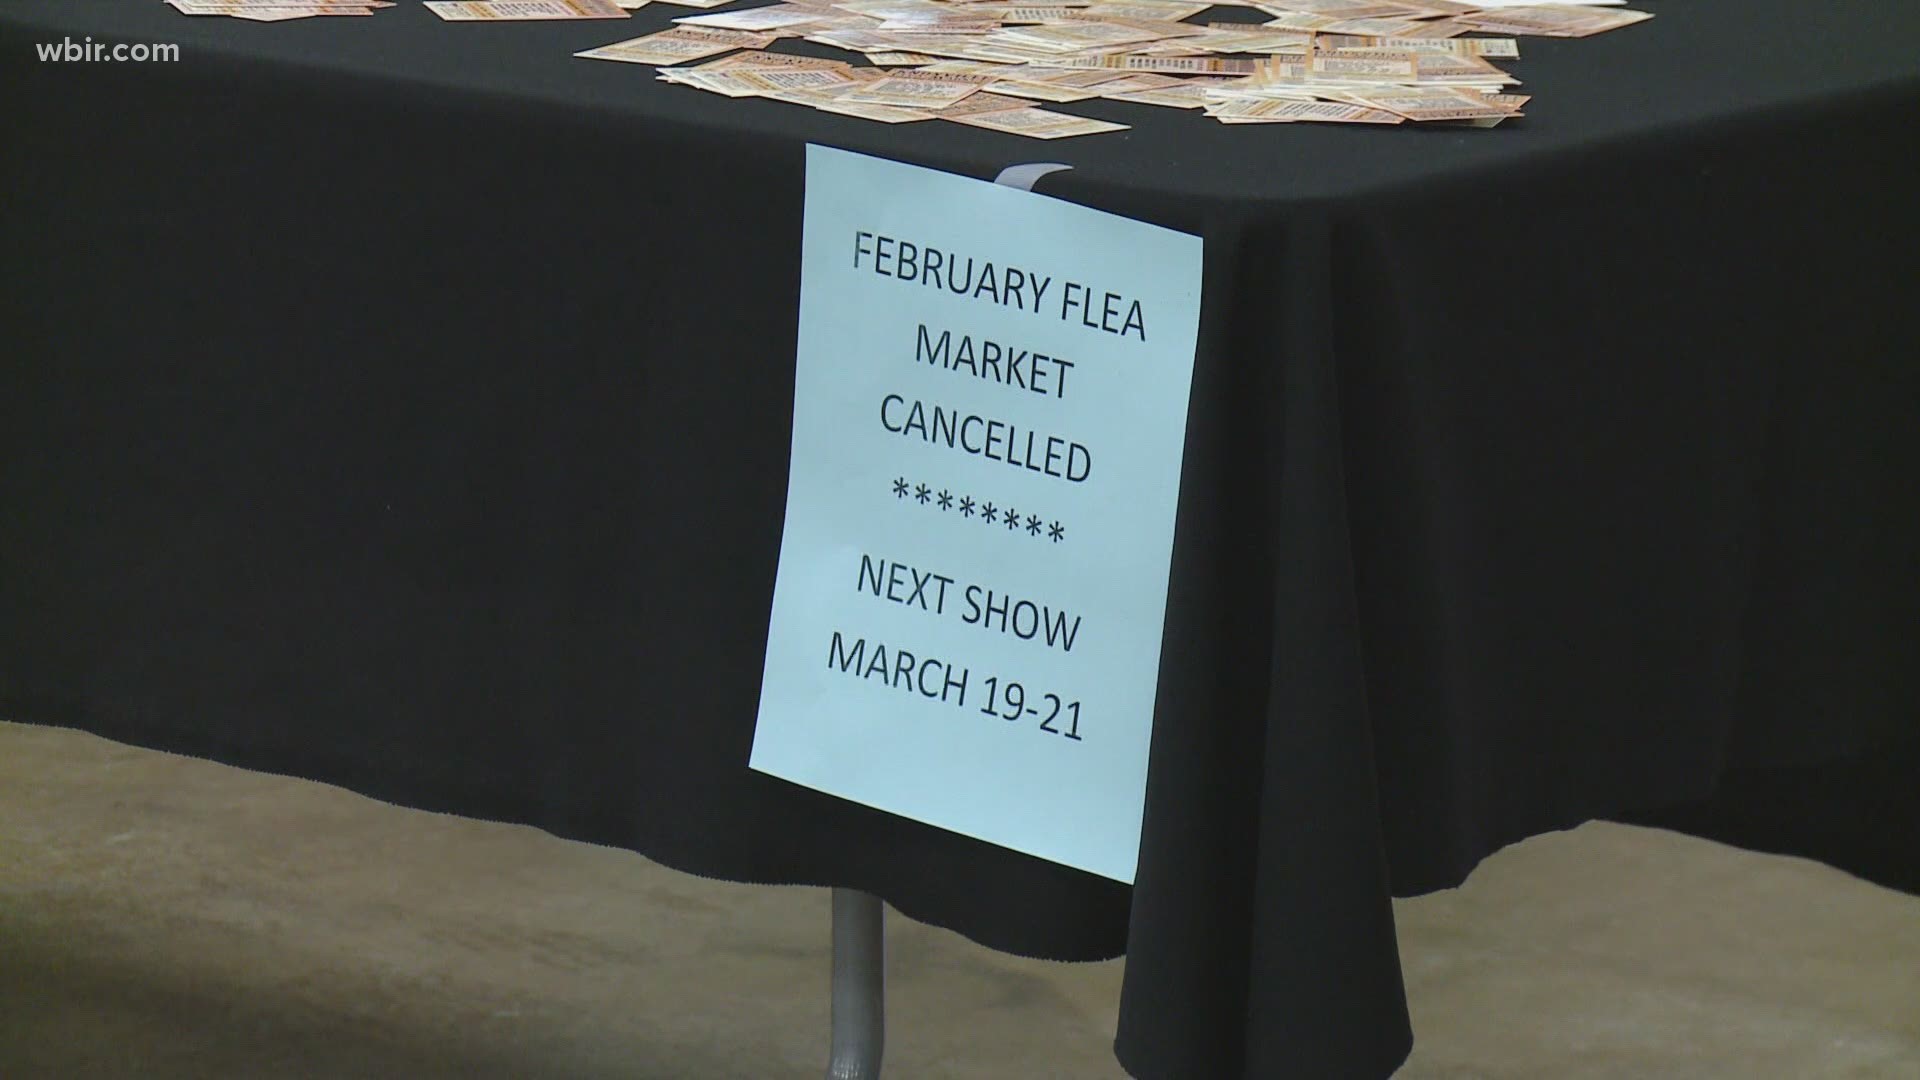 The flea market is back at the Expo Center here in Knoxville!